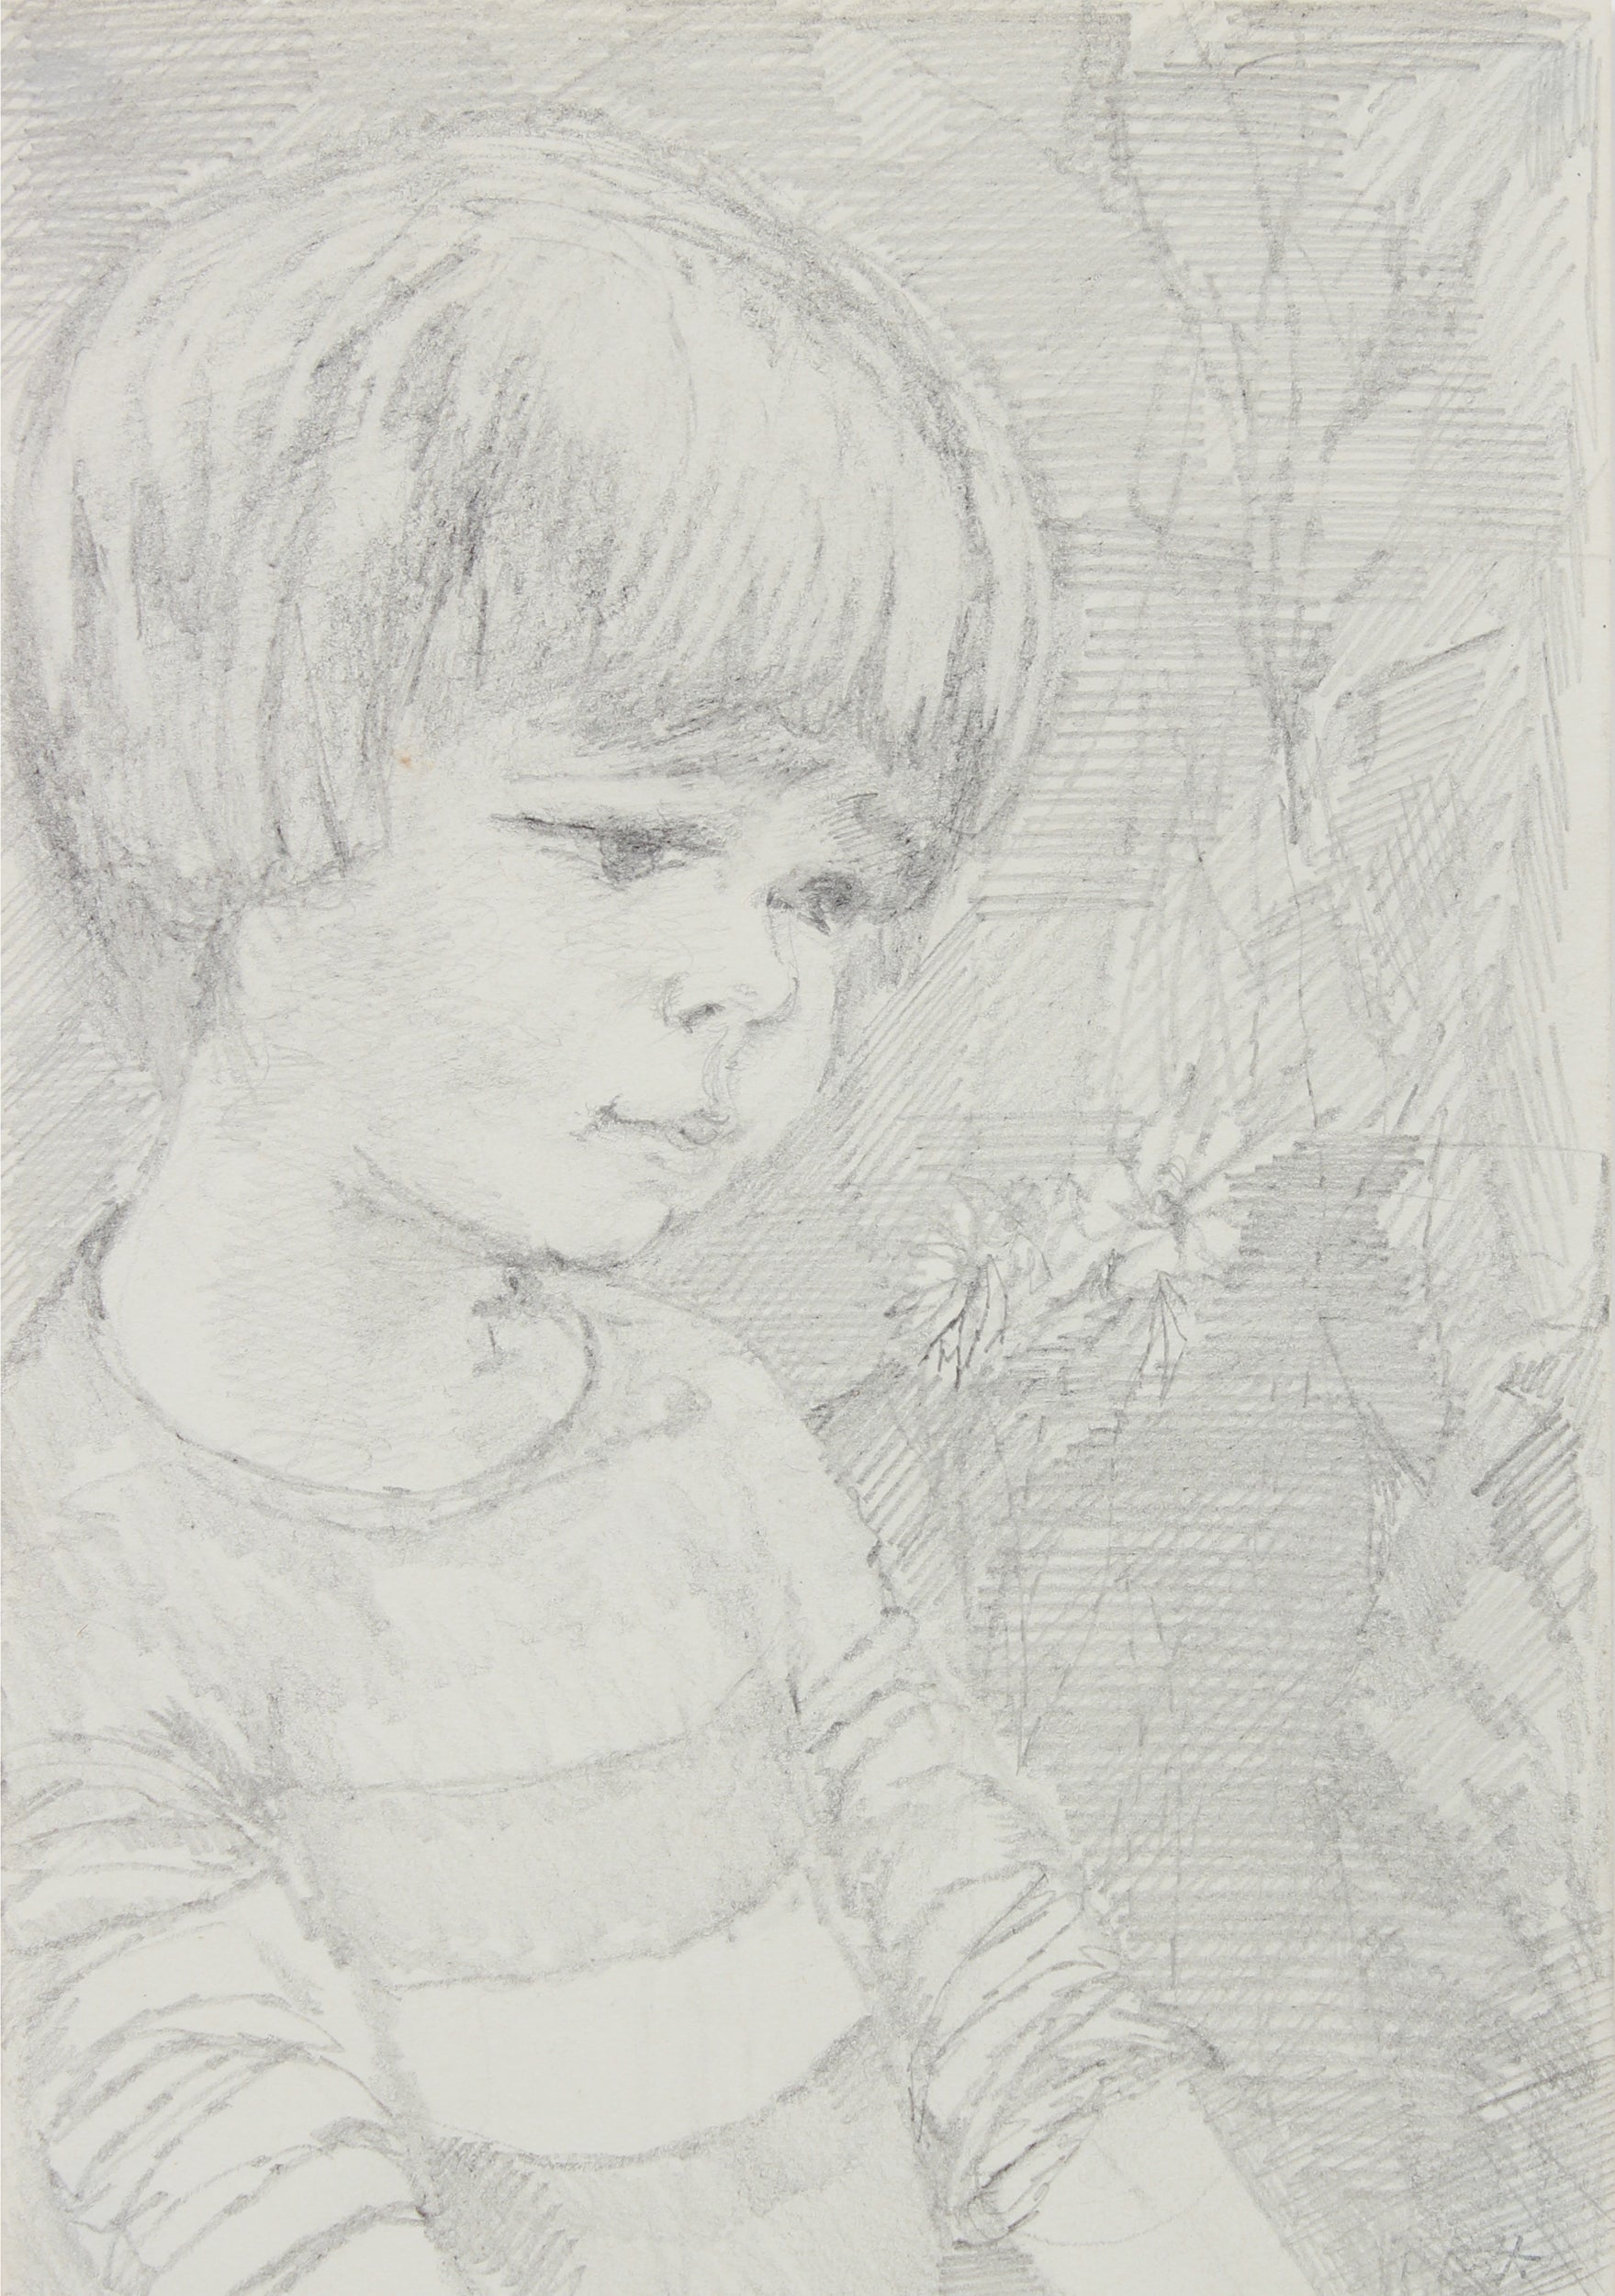 Monochrome Drawing of a Boy <br>1940-60s Graphite <br><br>#B0909